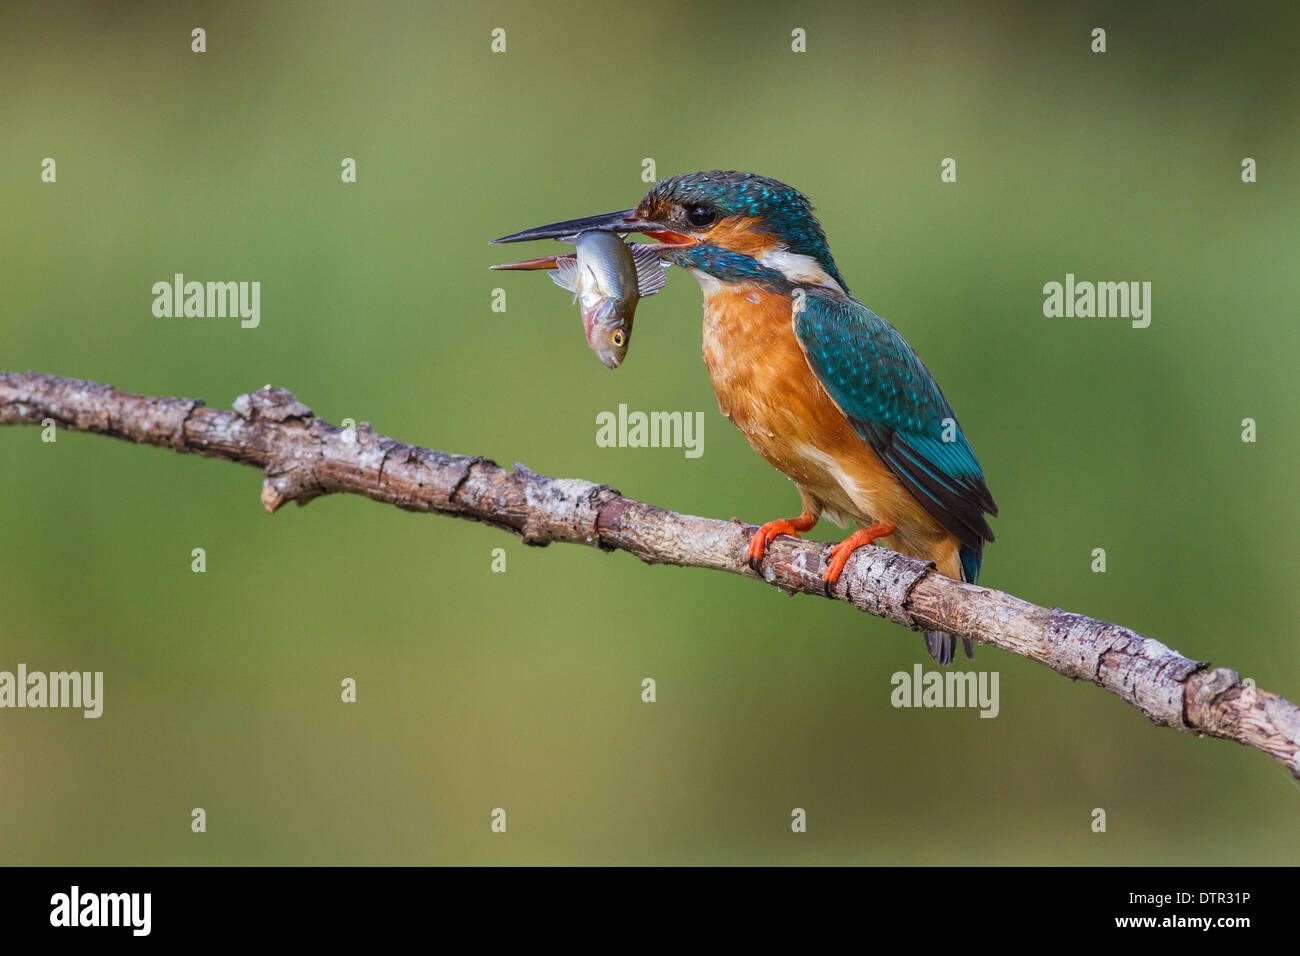 common kingfisher alcedo atthis perched with a fish Stock Photo